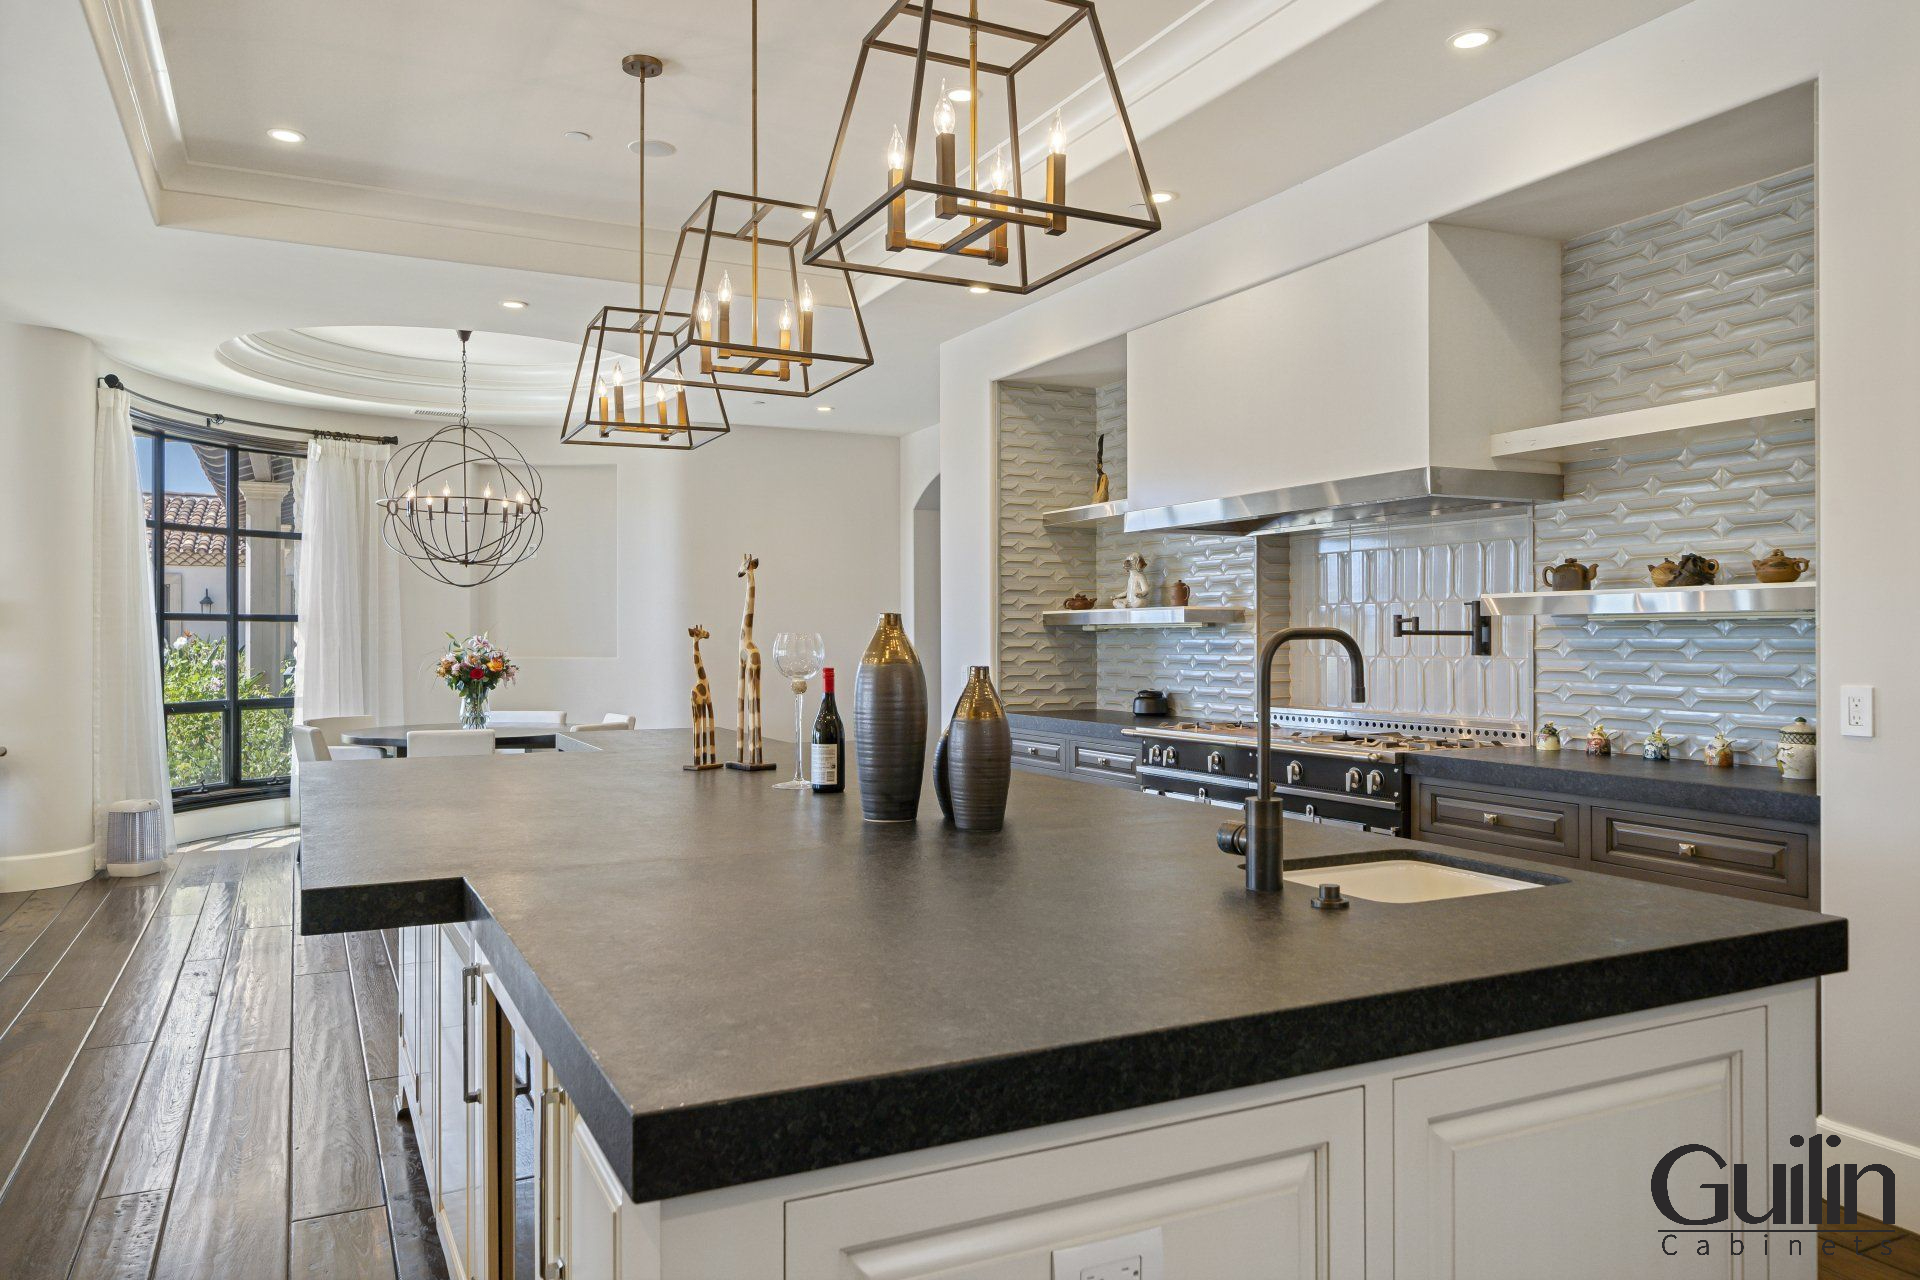 Granite countertops are one of the most popular materials for kitchen countertops.